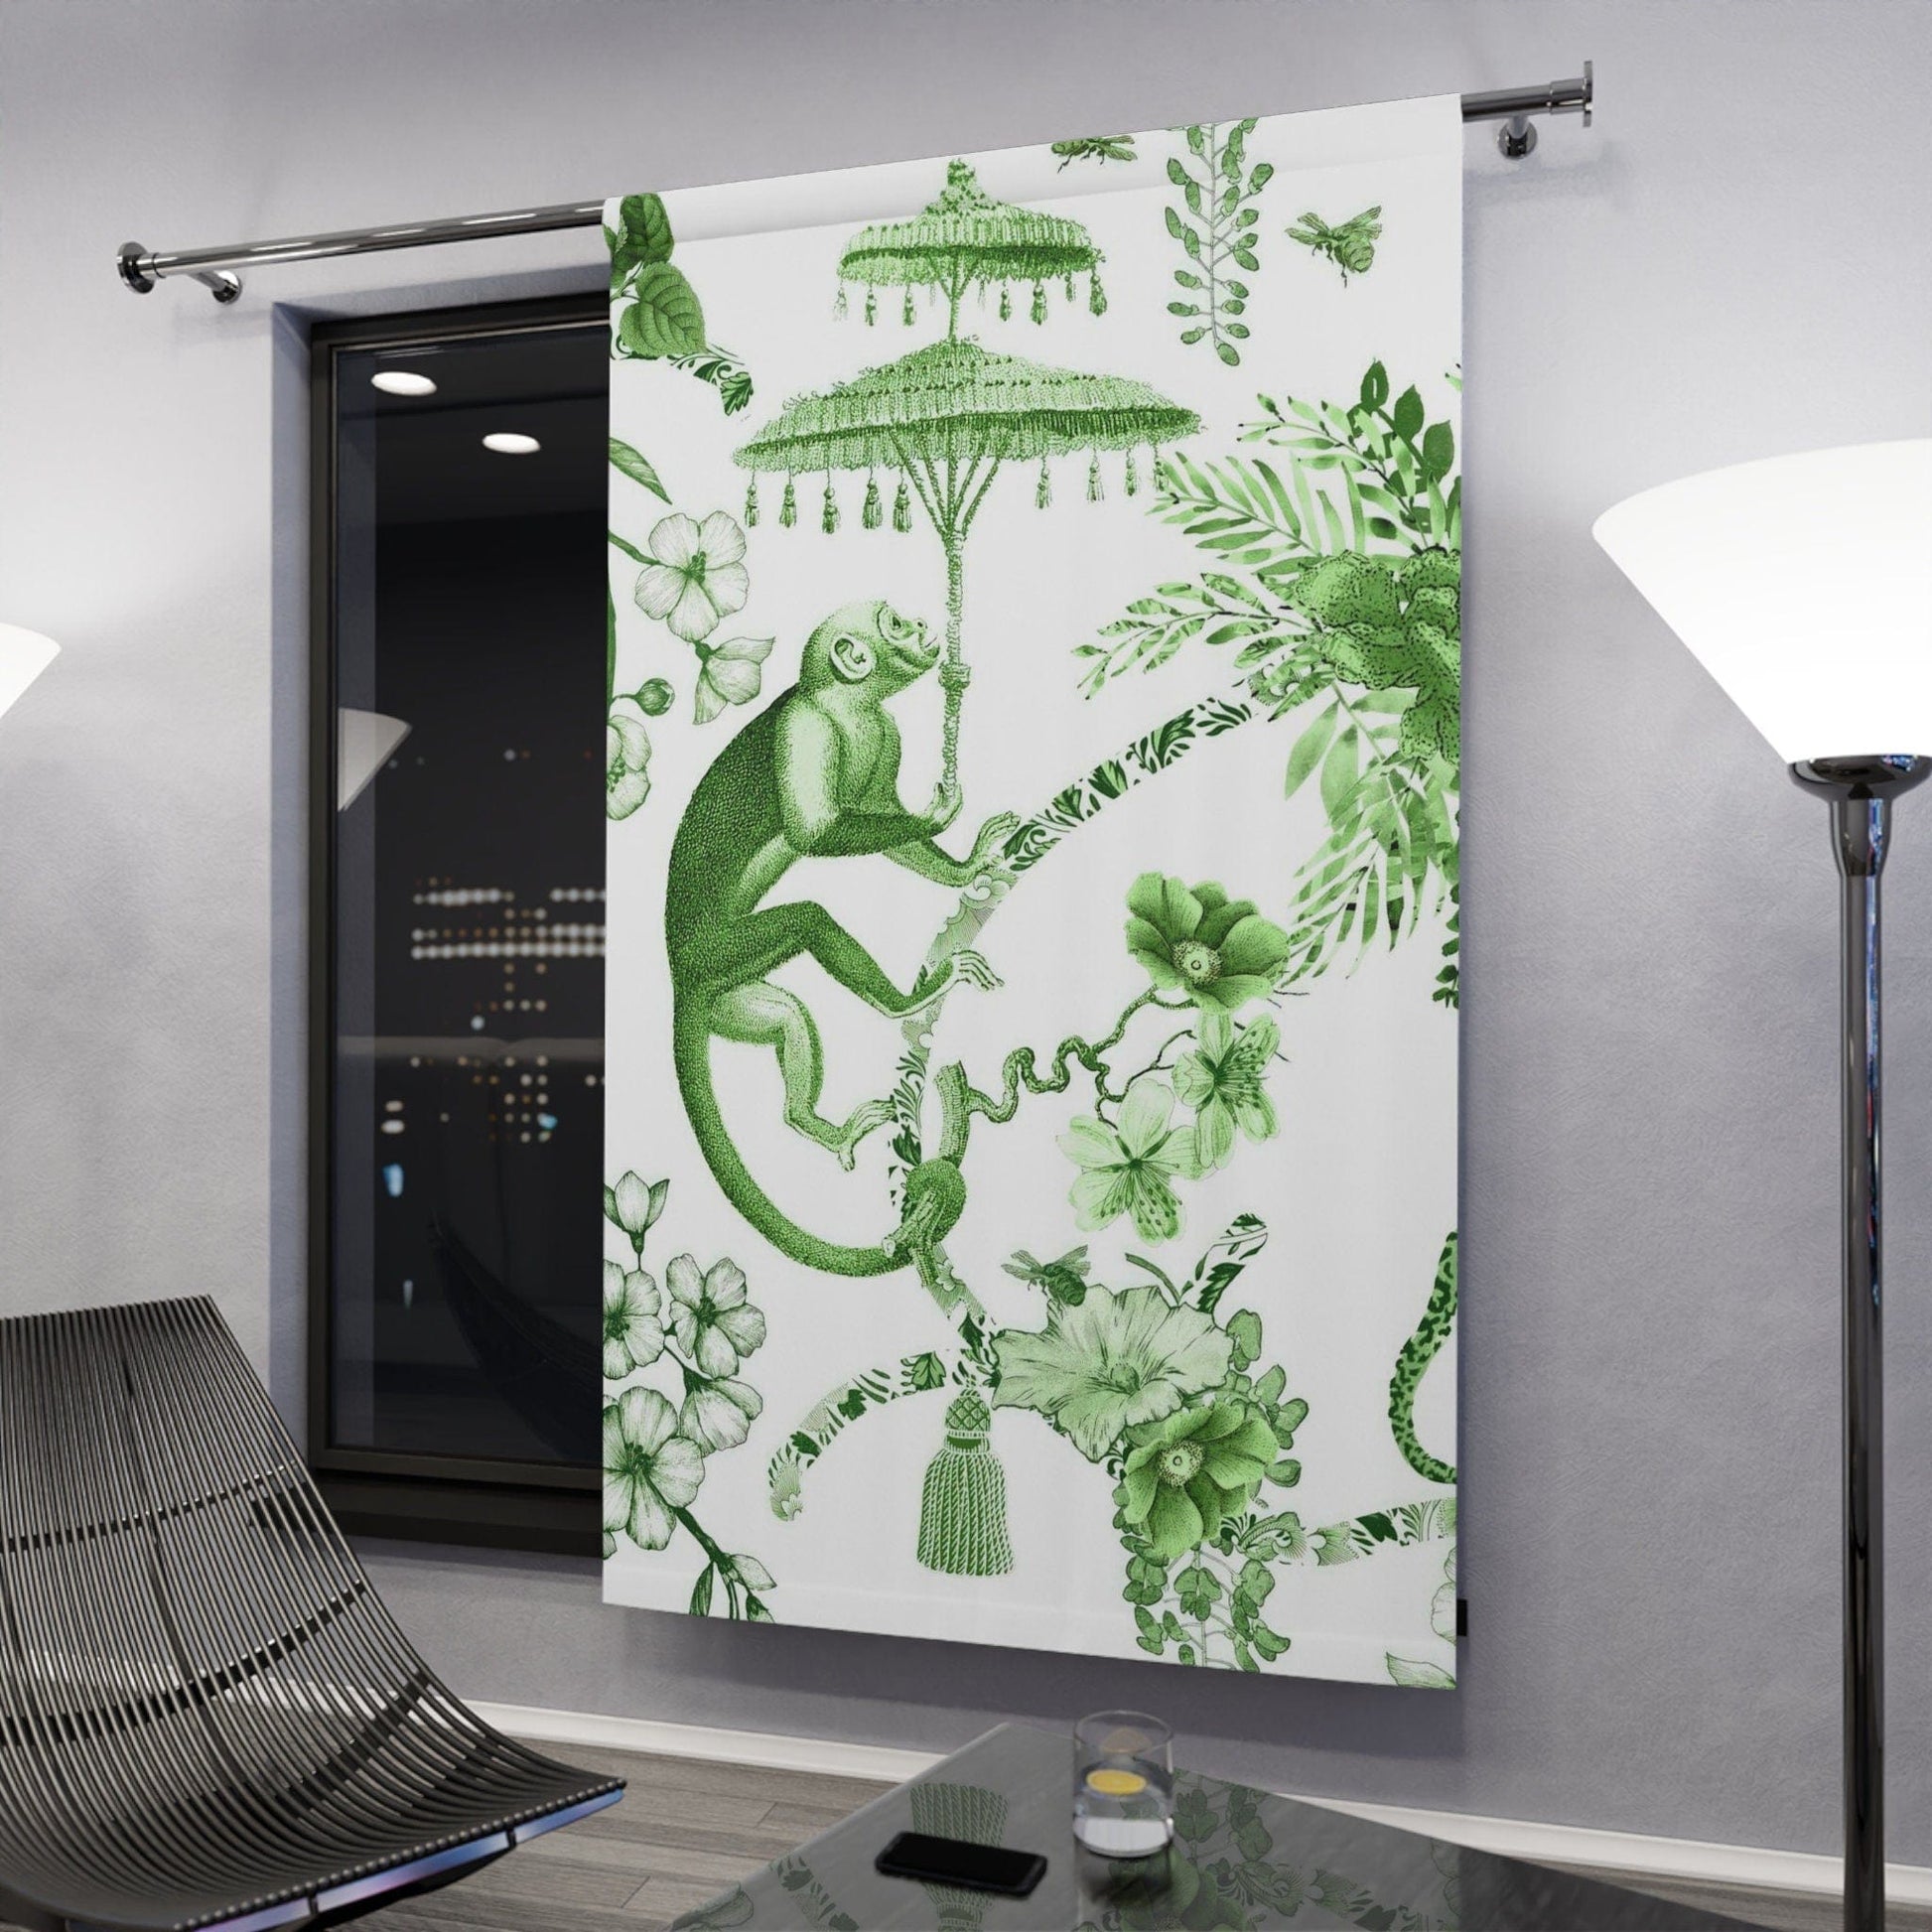 Kate McEnroe New York Chinoiserie Jungle Botanical Toile Window Curtains, Green, White Chinoiserie Floral Curtain Panels, Country Farmhouse Decor - 122481123 Window Curtains